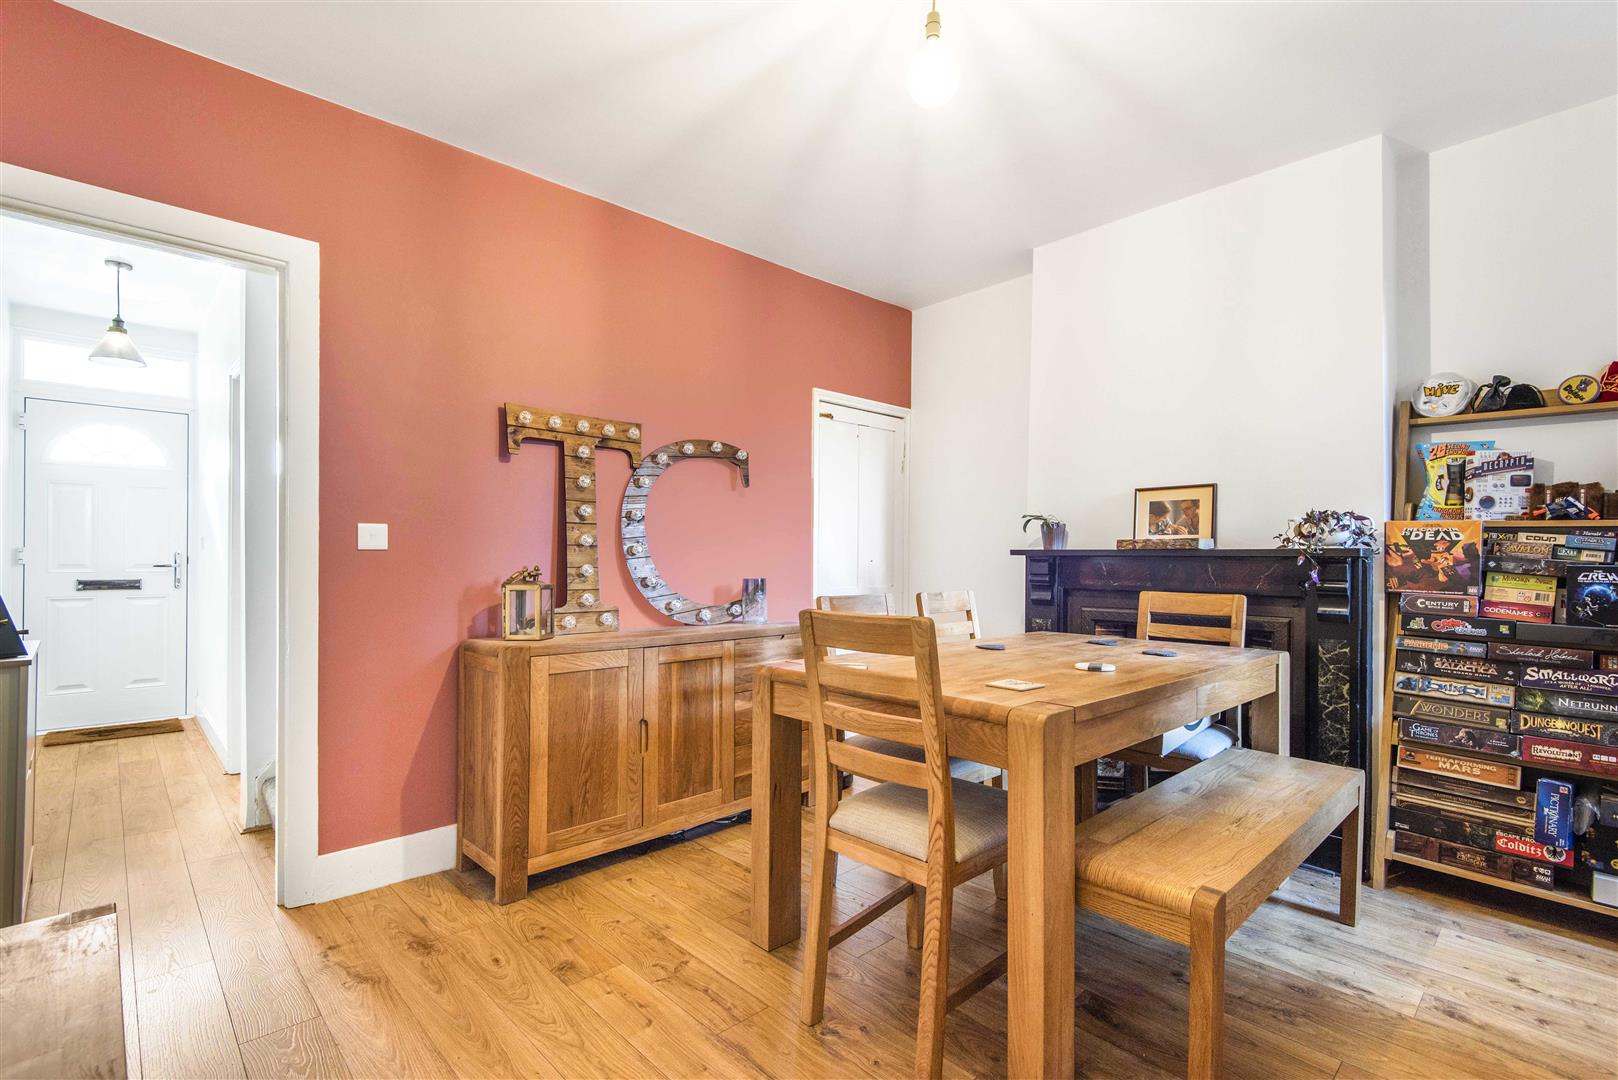 Gosbrook Road Caversham house for sale in Reading